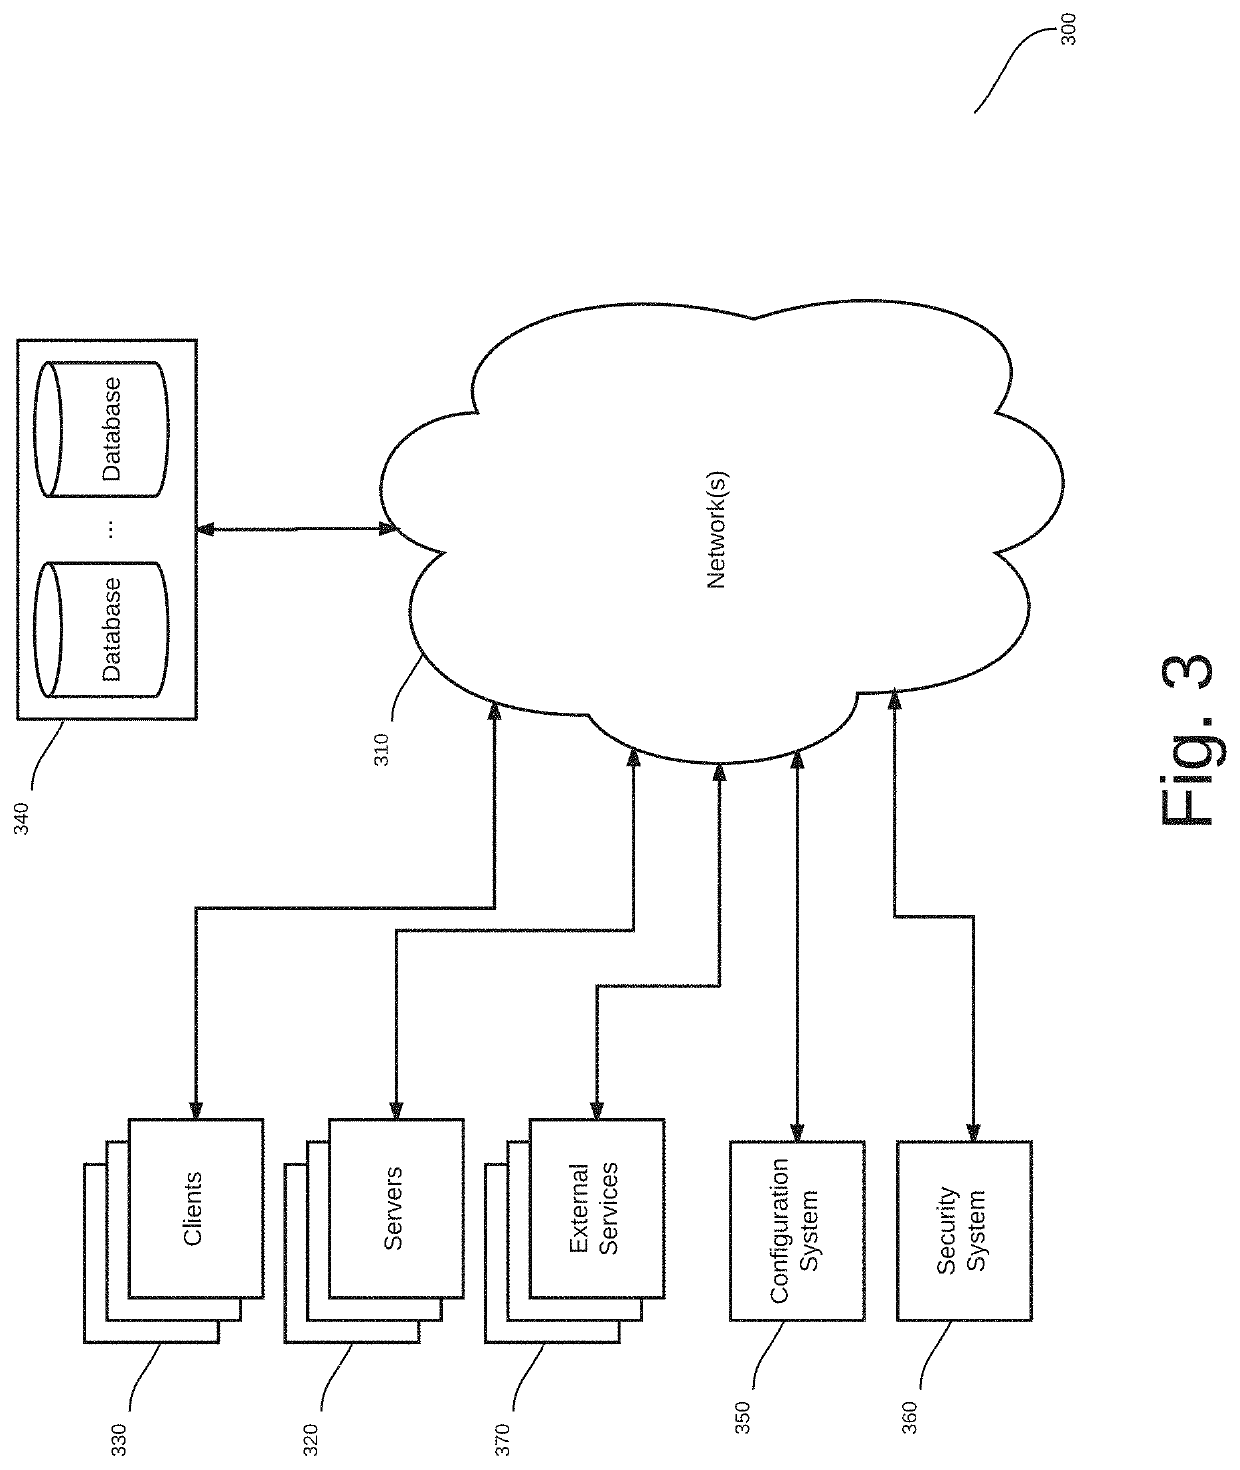 System and method for off-chain cryptographic transaction verification